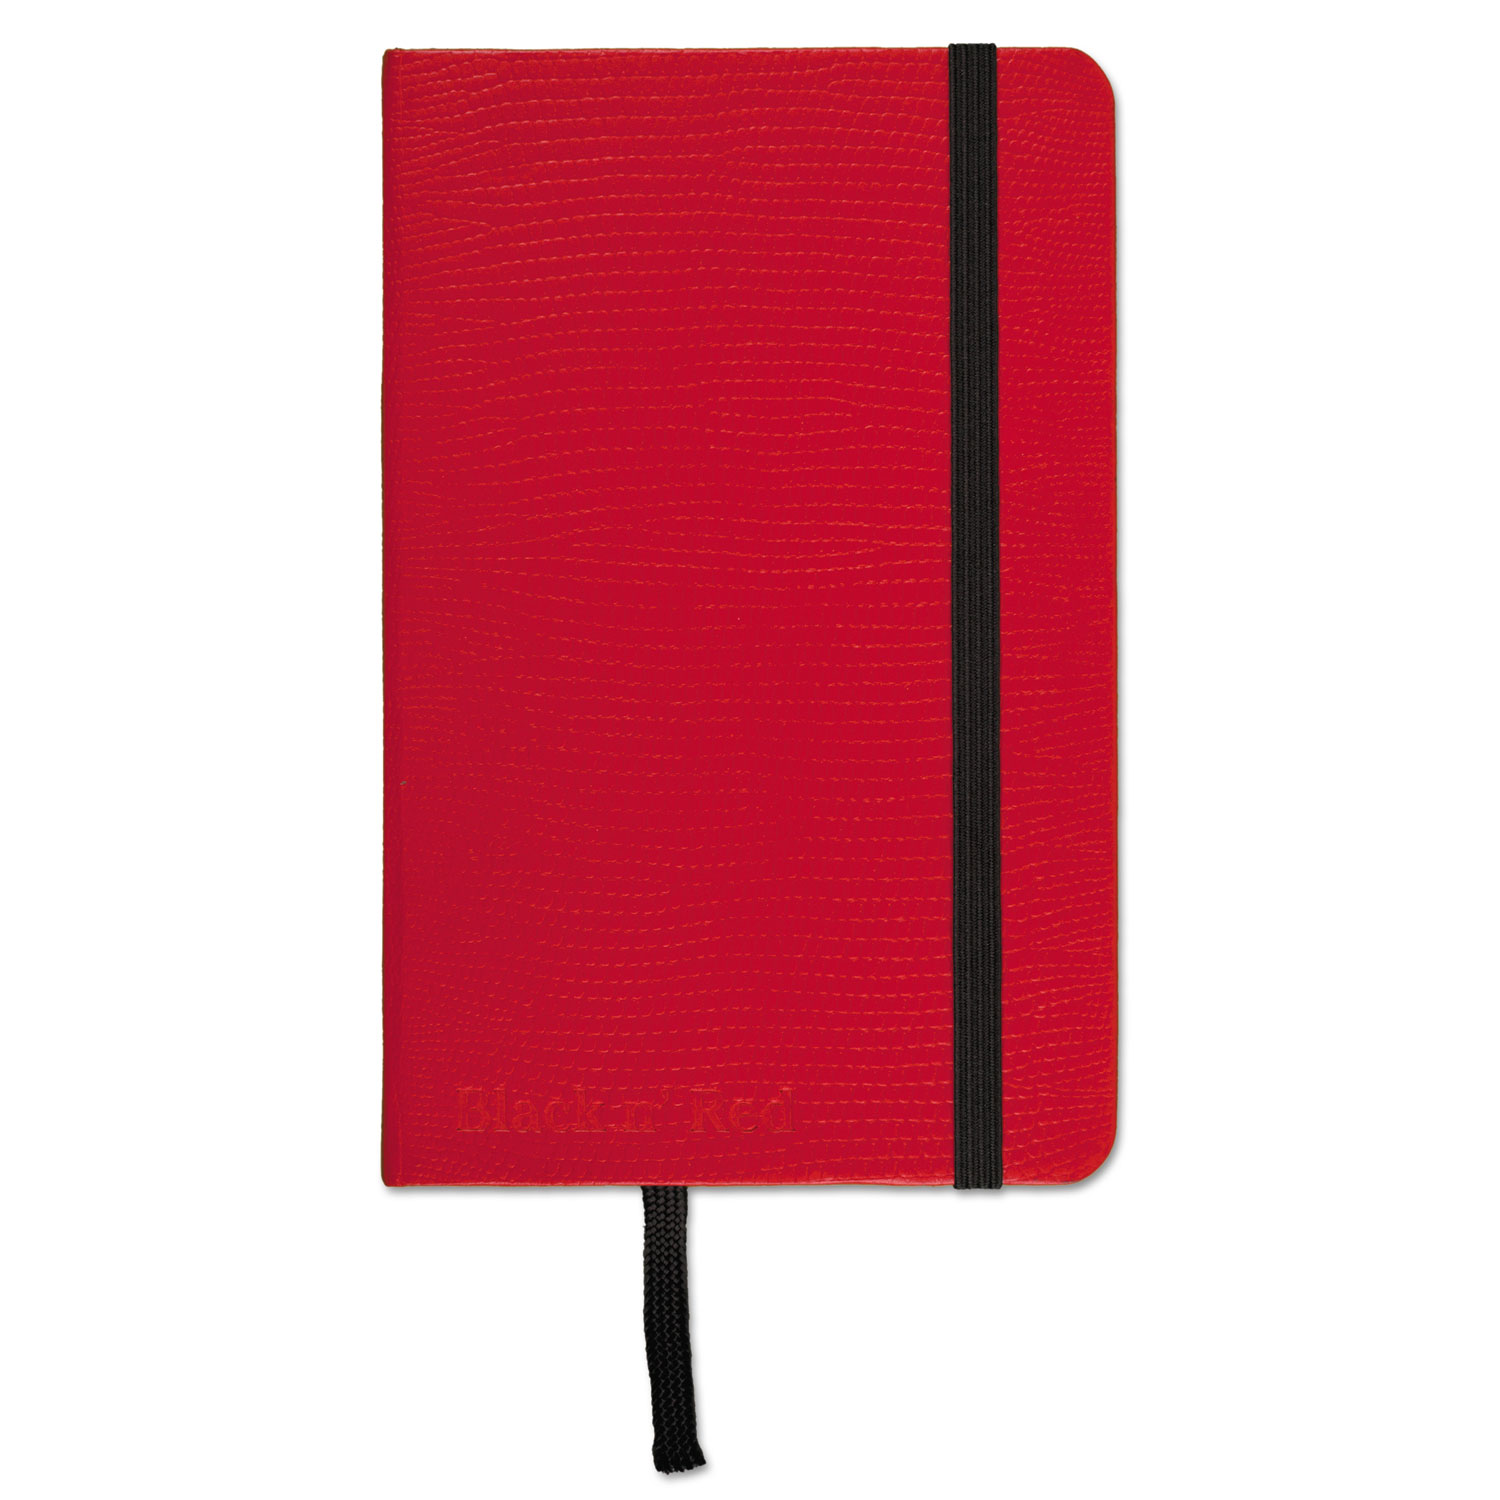  Black n' Red 400065004 Red Casebound Hardcover Notebook, Wide/Legal Rule, Red Cover, 5.5 x 3.5, 71 Sheets (JDK400065004) 